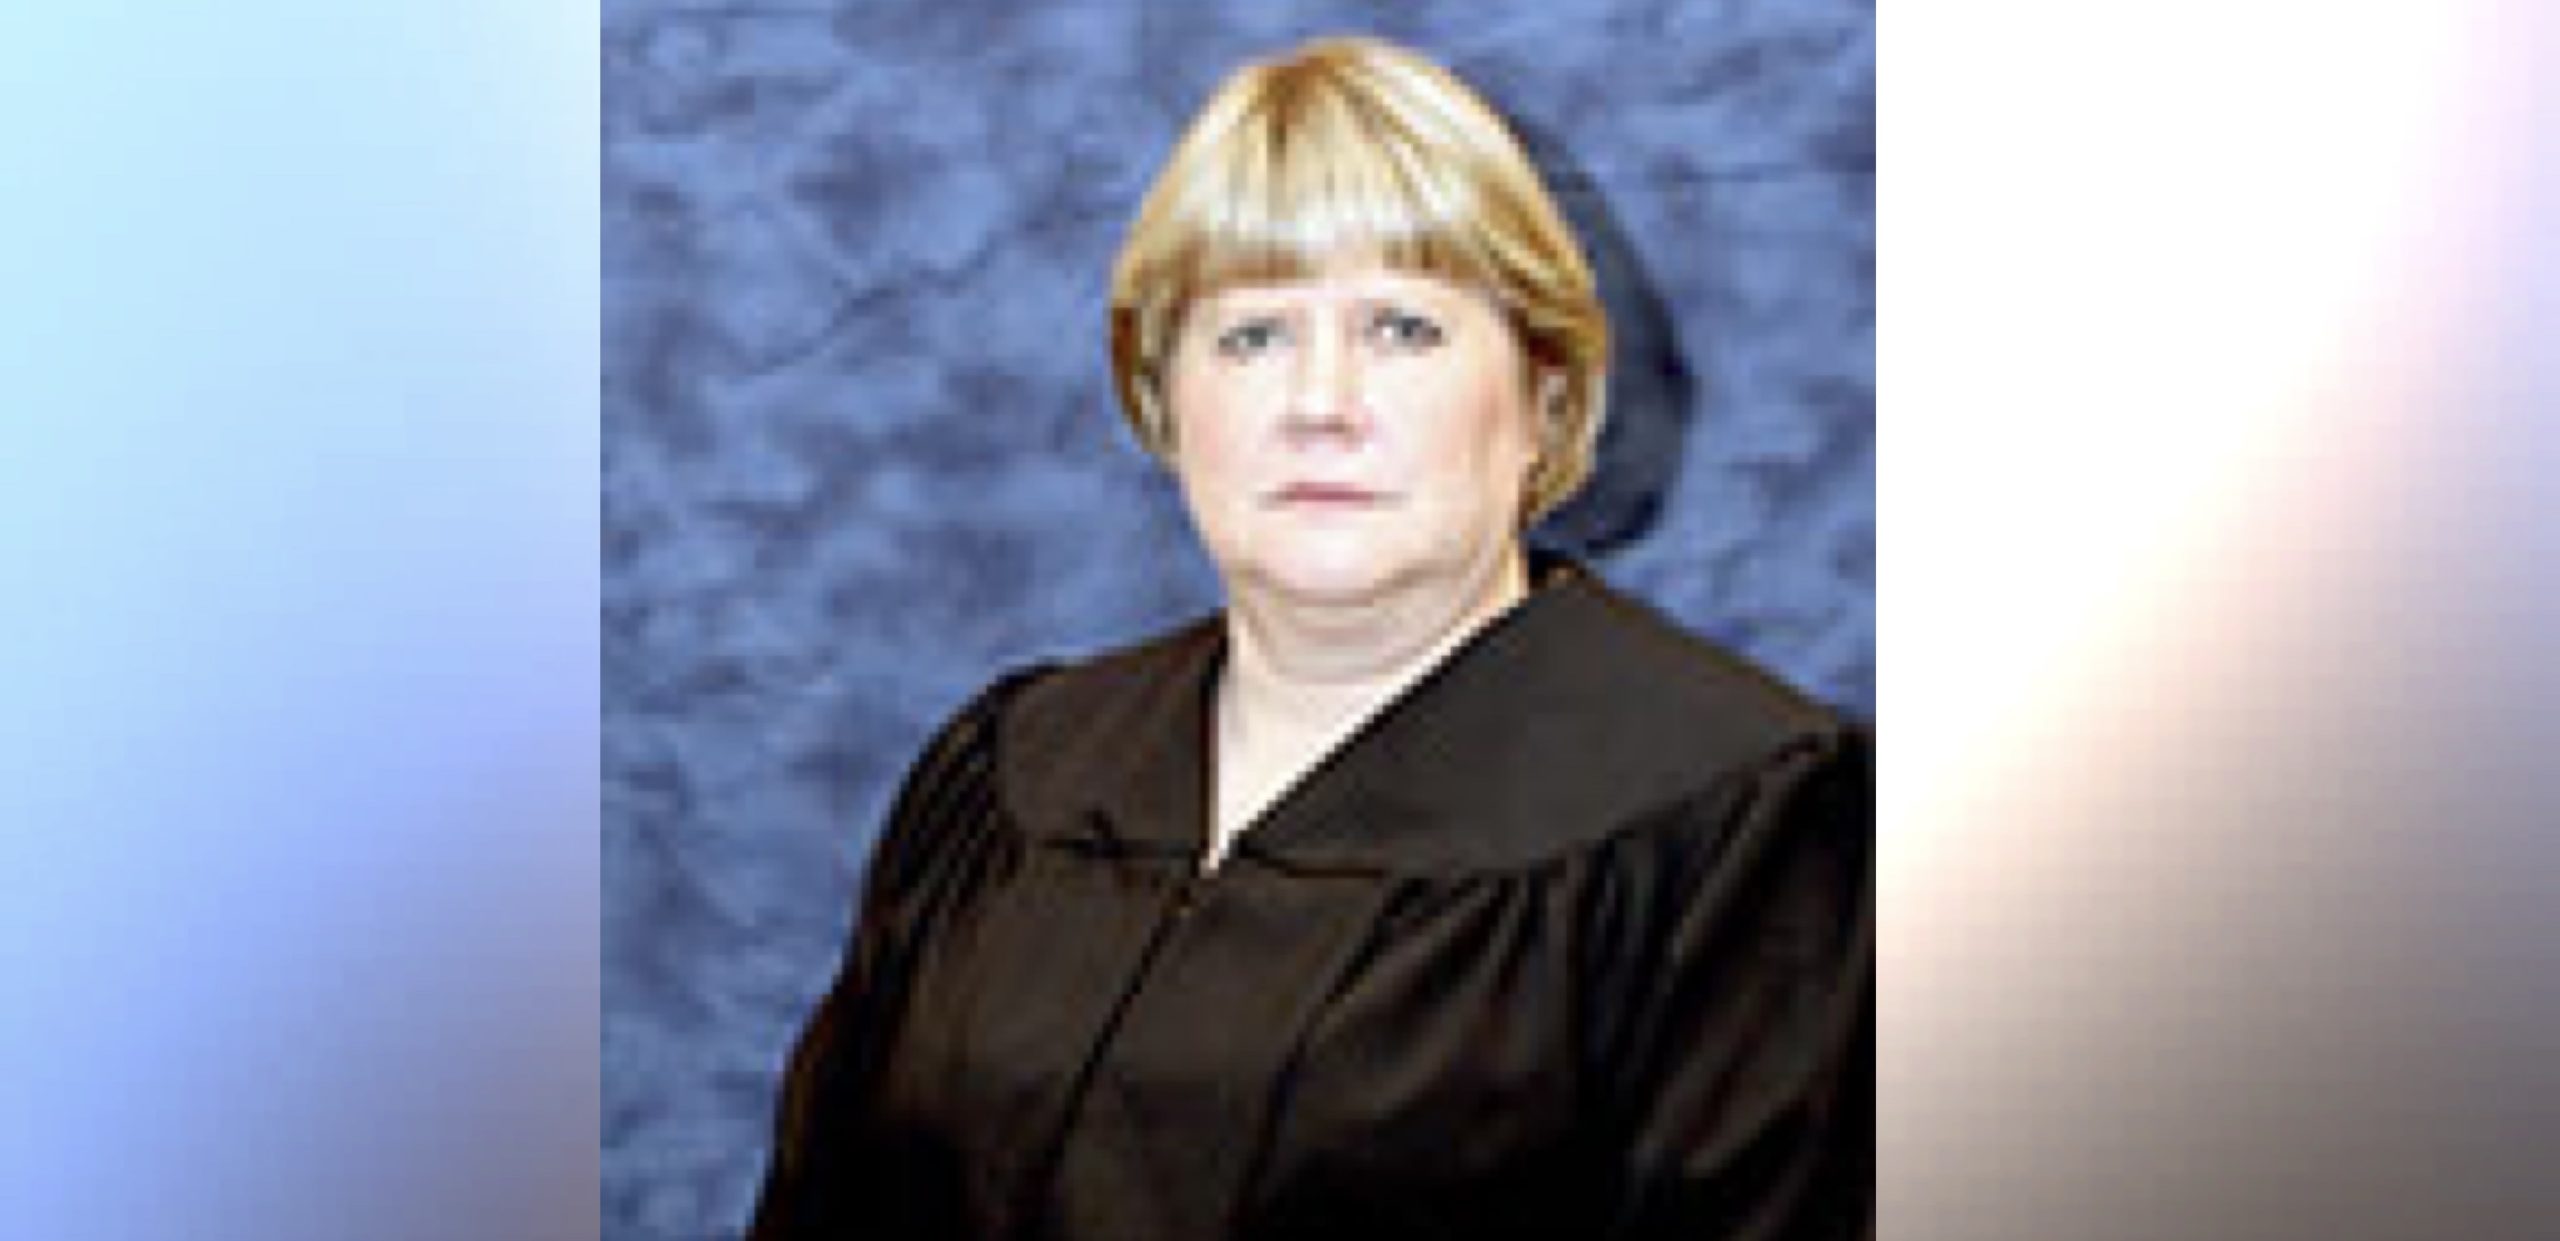 WV Family Court Judge to face impeachment